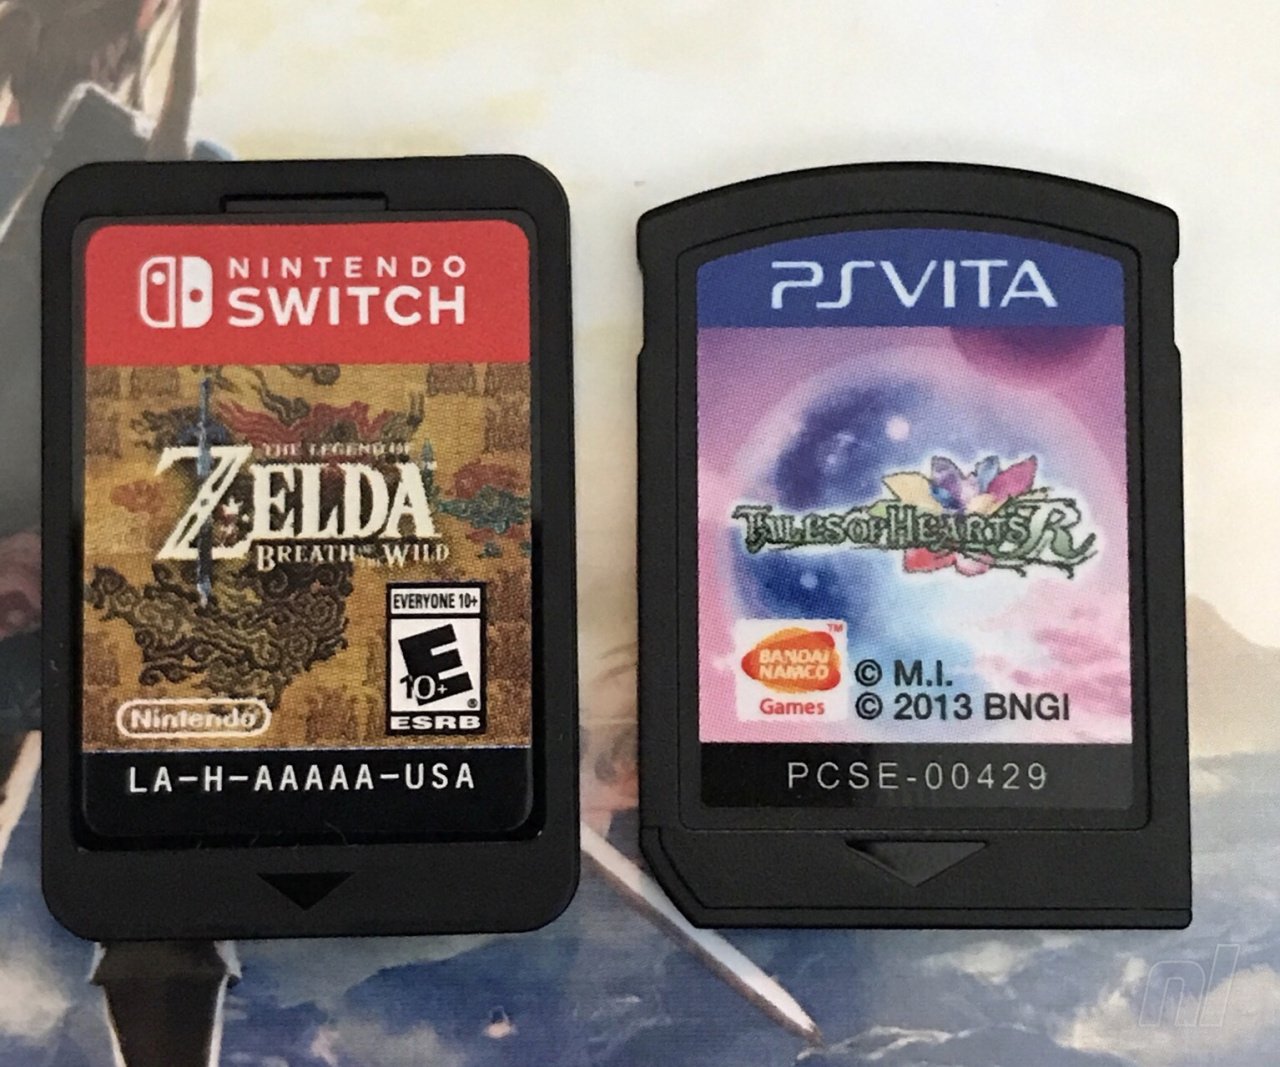 Gallery: Here's How Nintendo Switch Game Cards Compare To